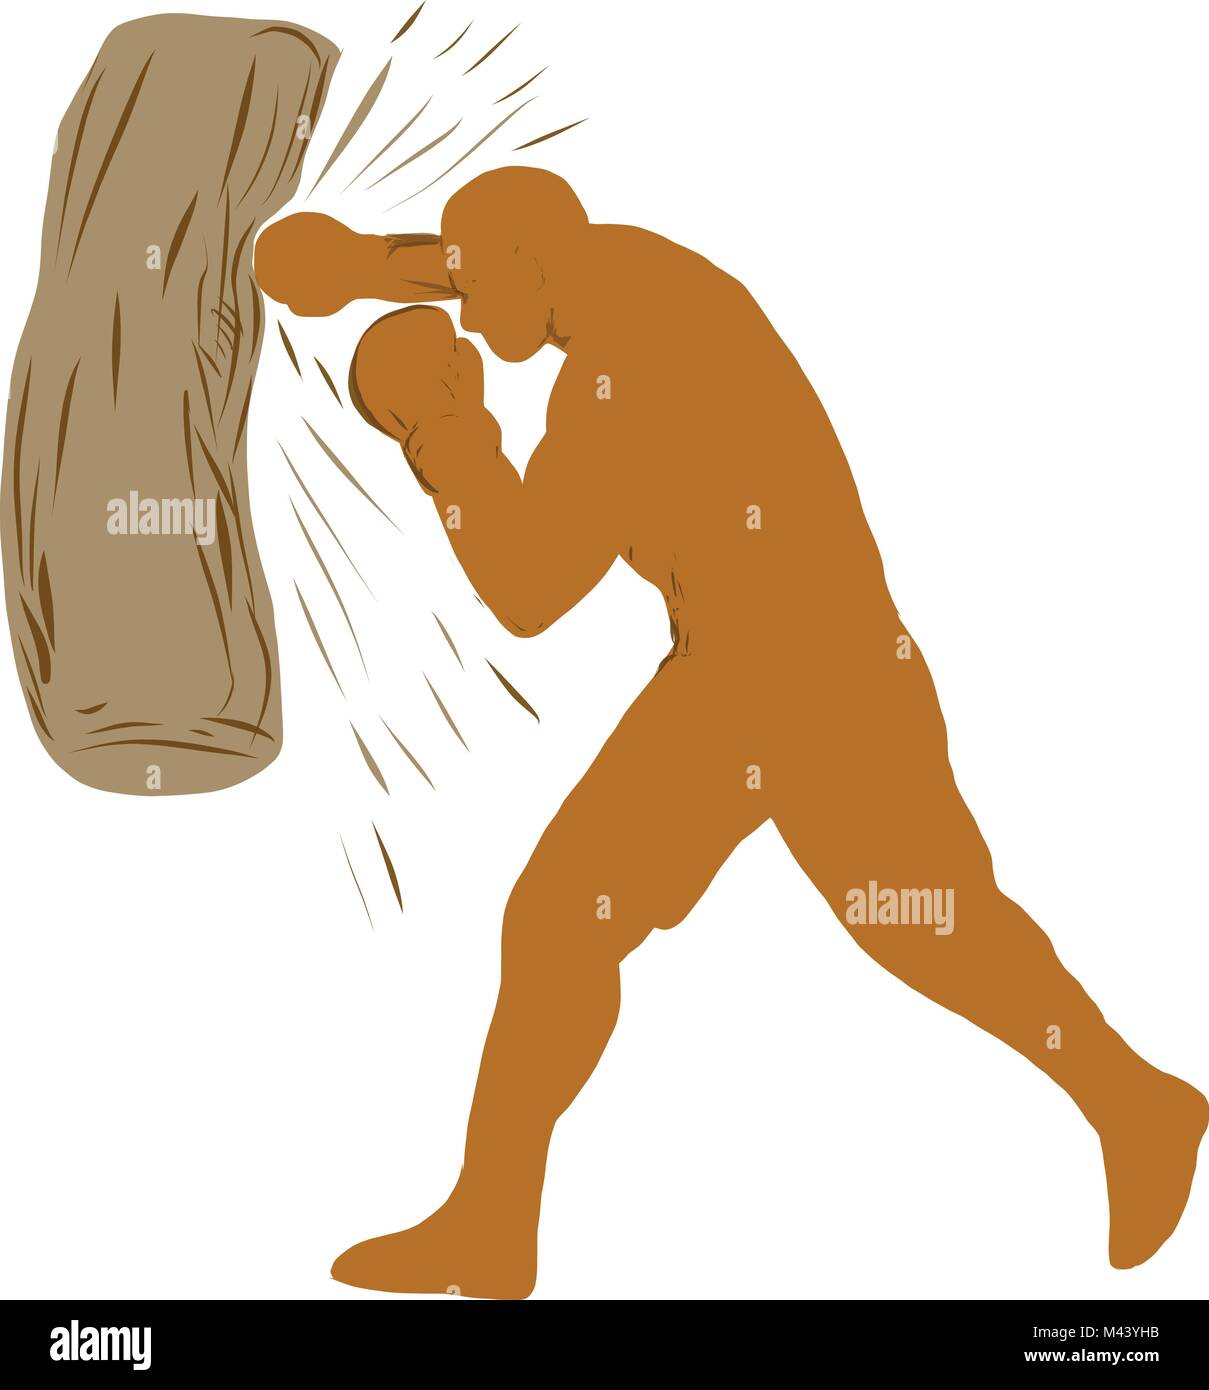 Drawing sketch style illustration of a boxer, pugilist or prize fighter punching a bag viewed from side on isolated background. Stock Vector